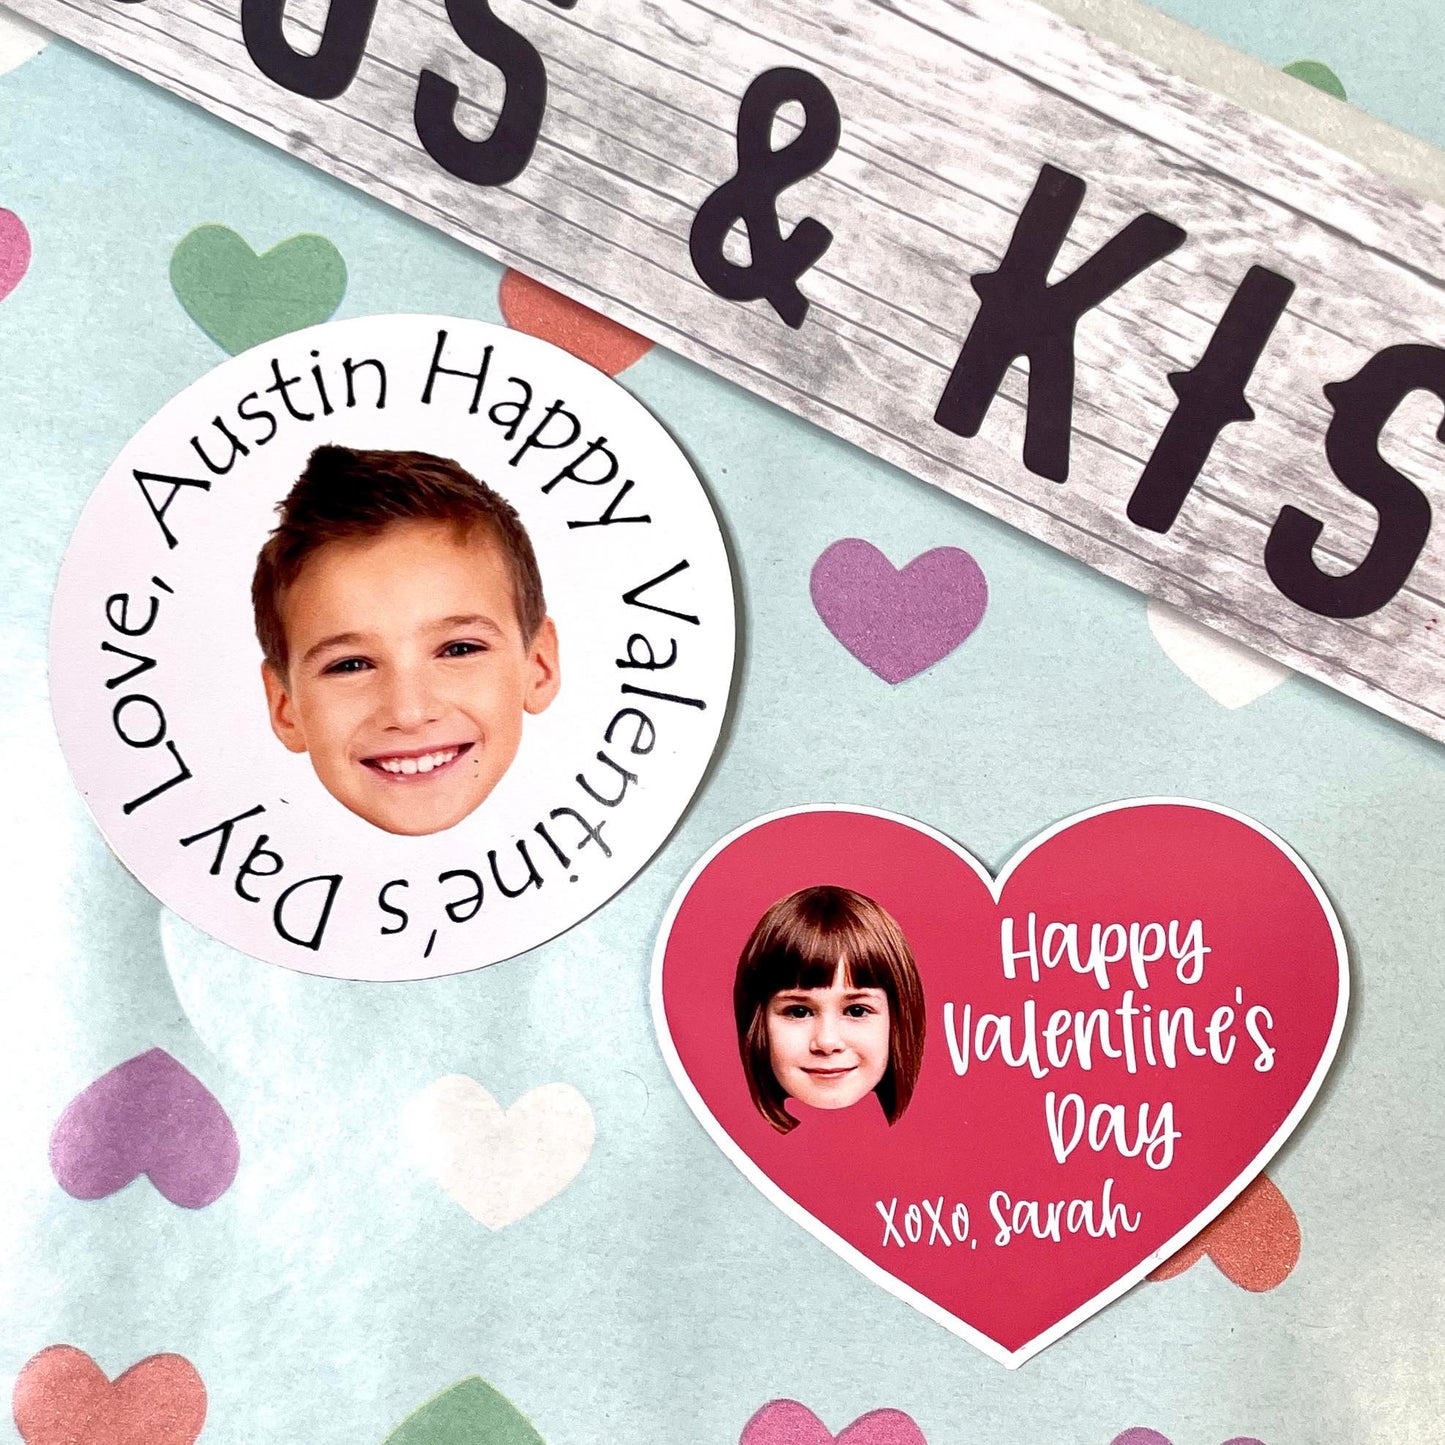 Valentine's Day Personalized Sticker Set - Spread Love with Every Peel!